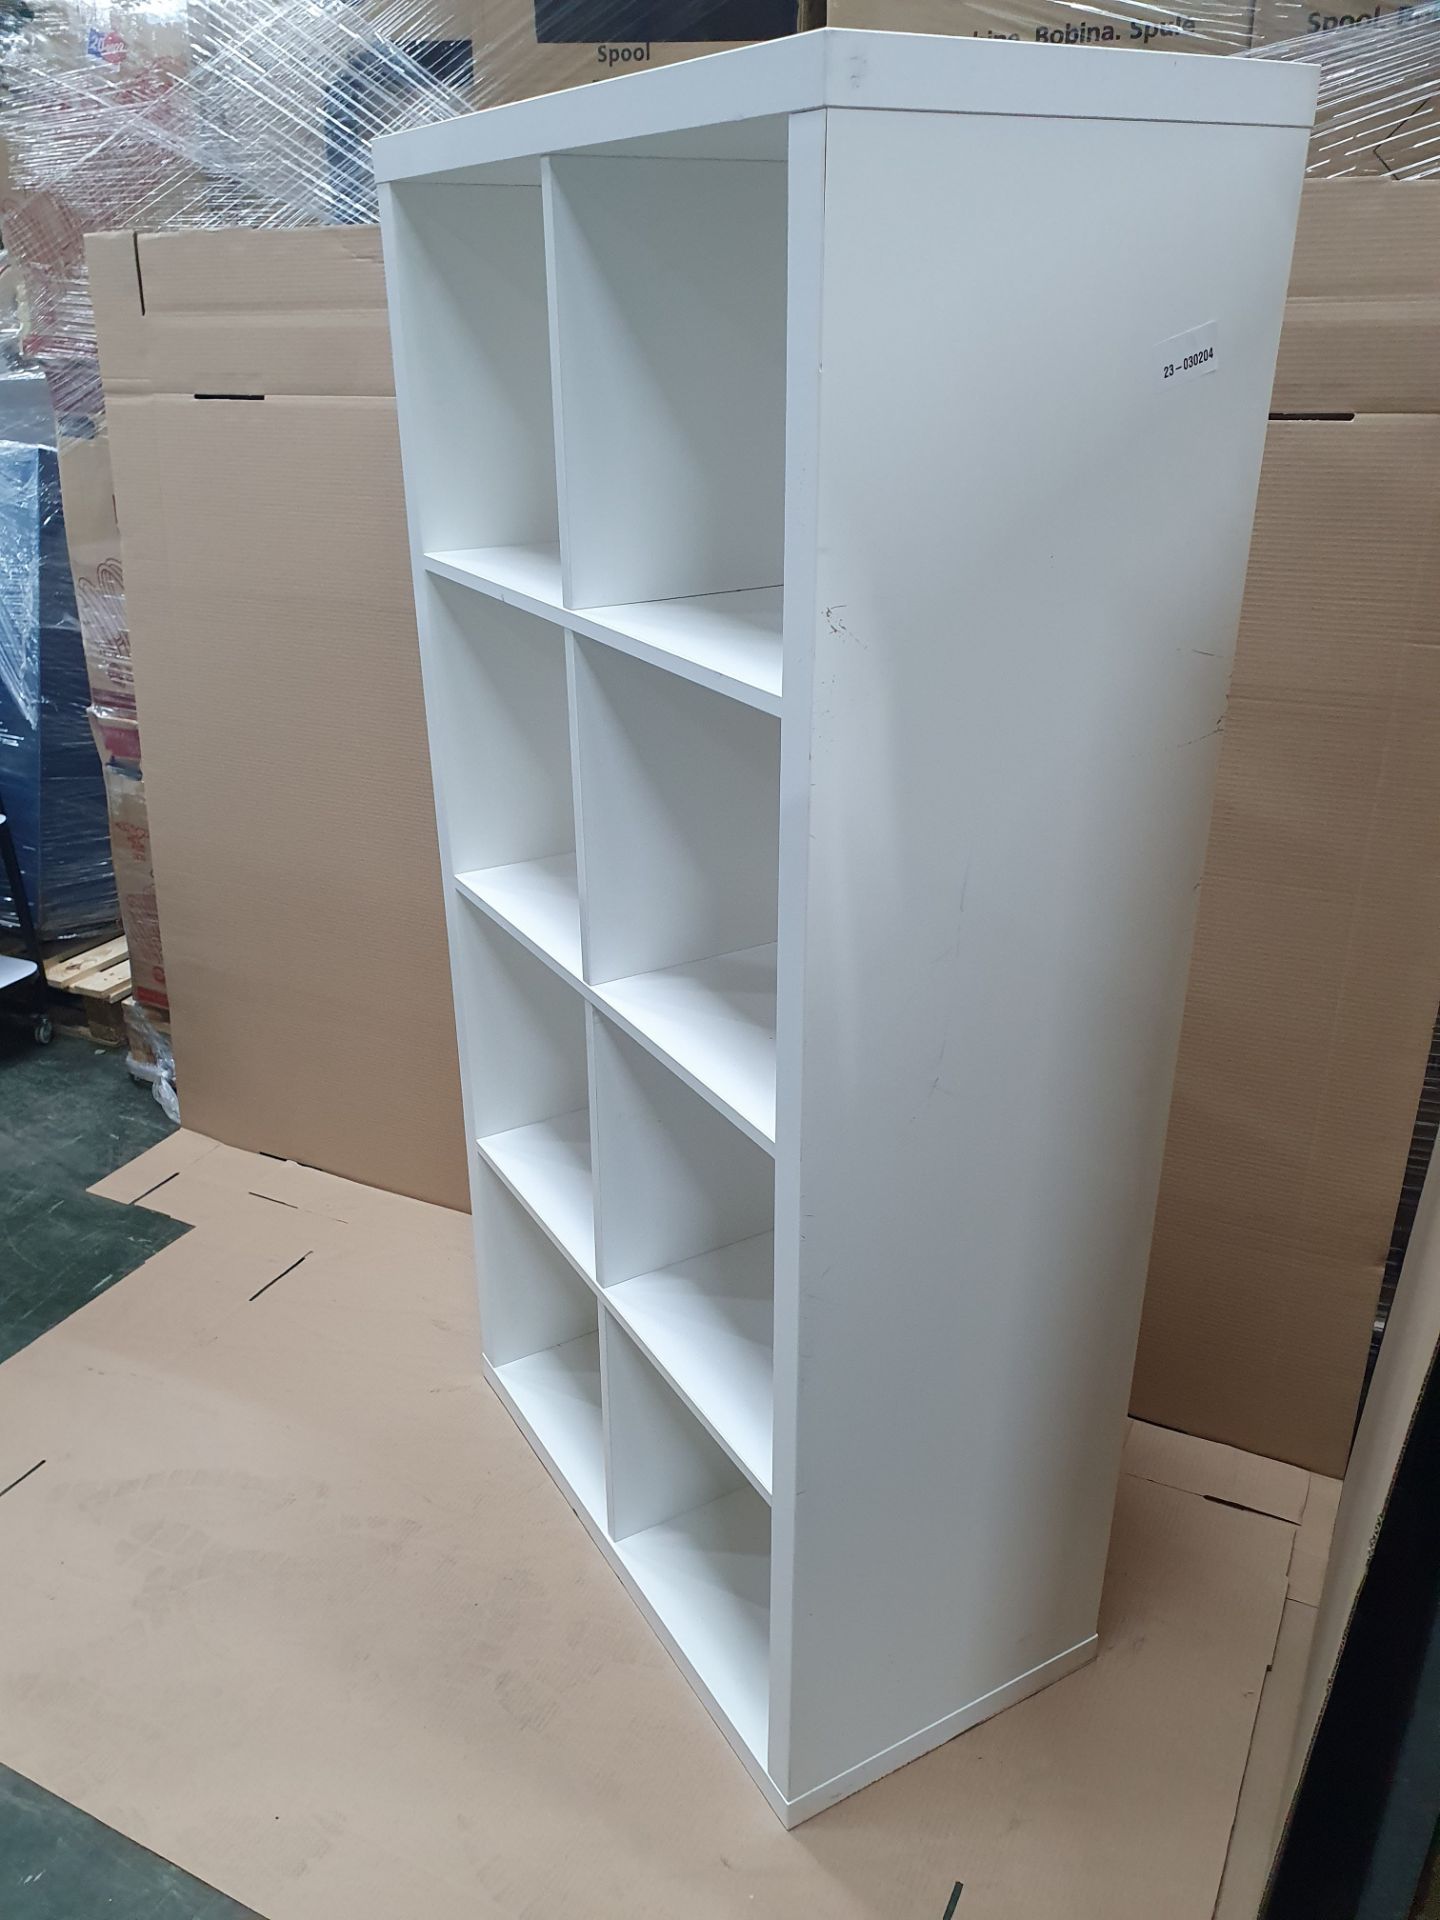 Bookcase with 8 Compartments in White with Wall Mounted Attachments - Image 3 of 4